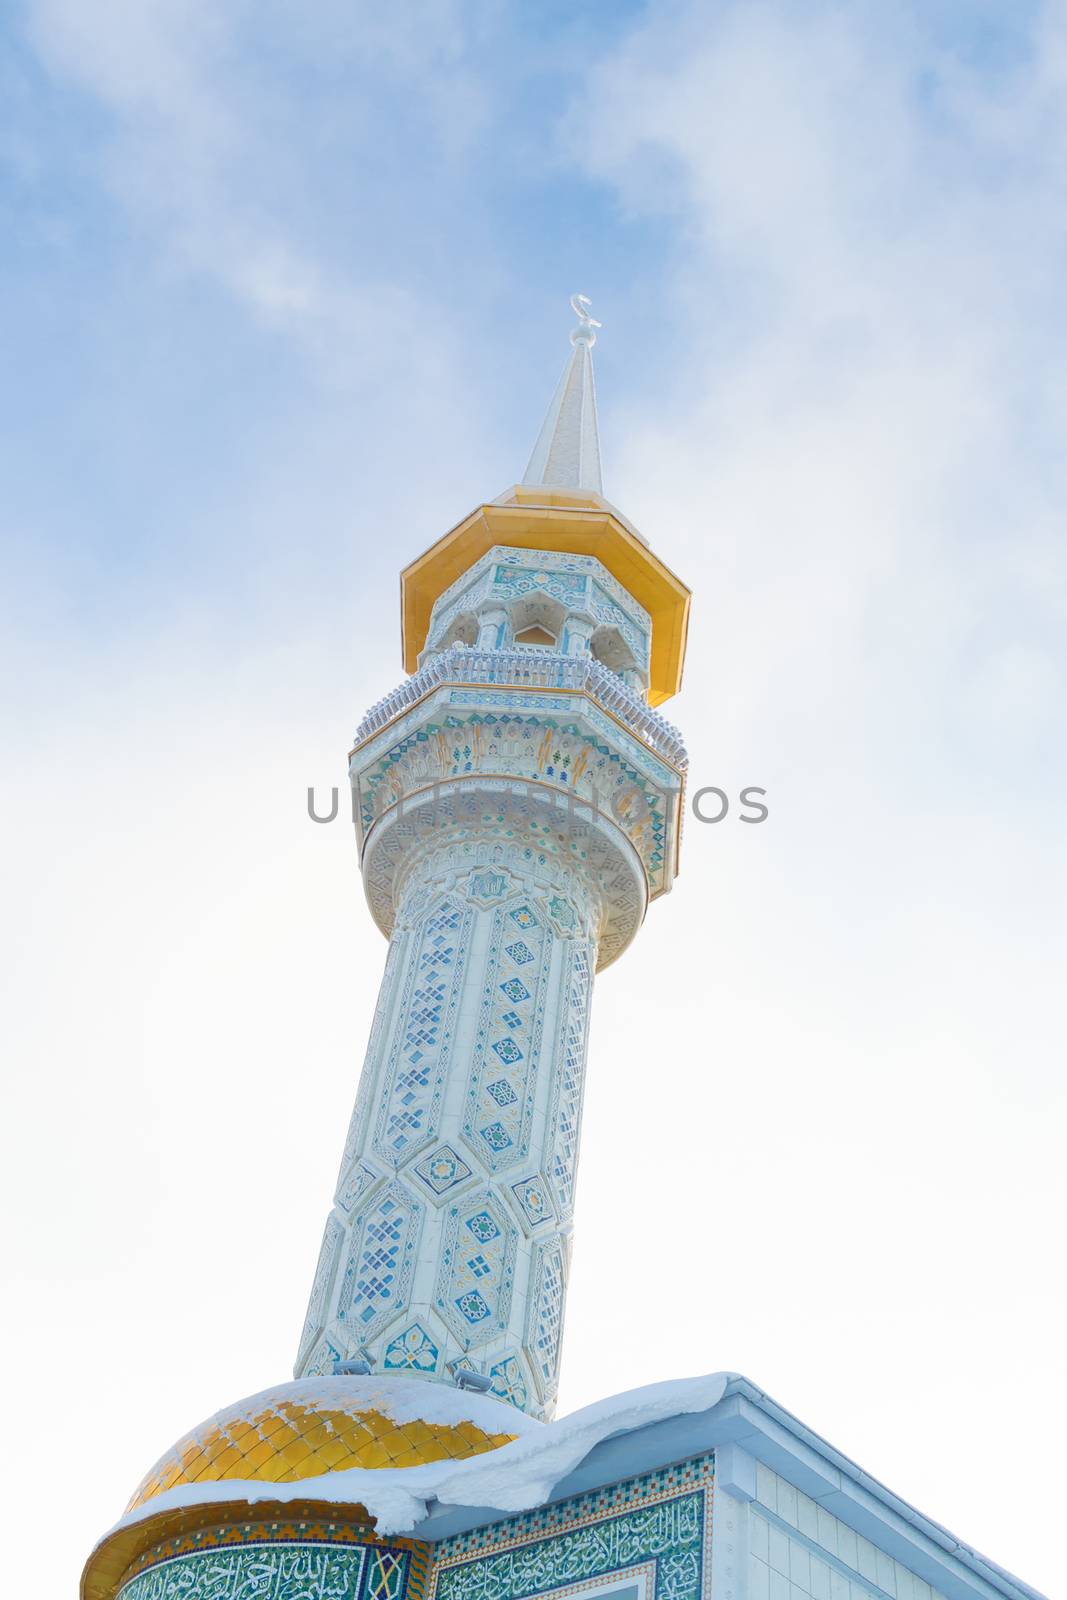 Minaret of mosque in Siberian city. Horizon is littered with author's idea.